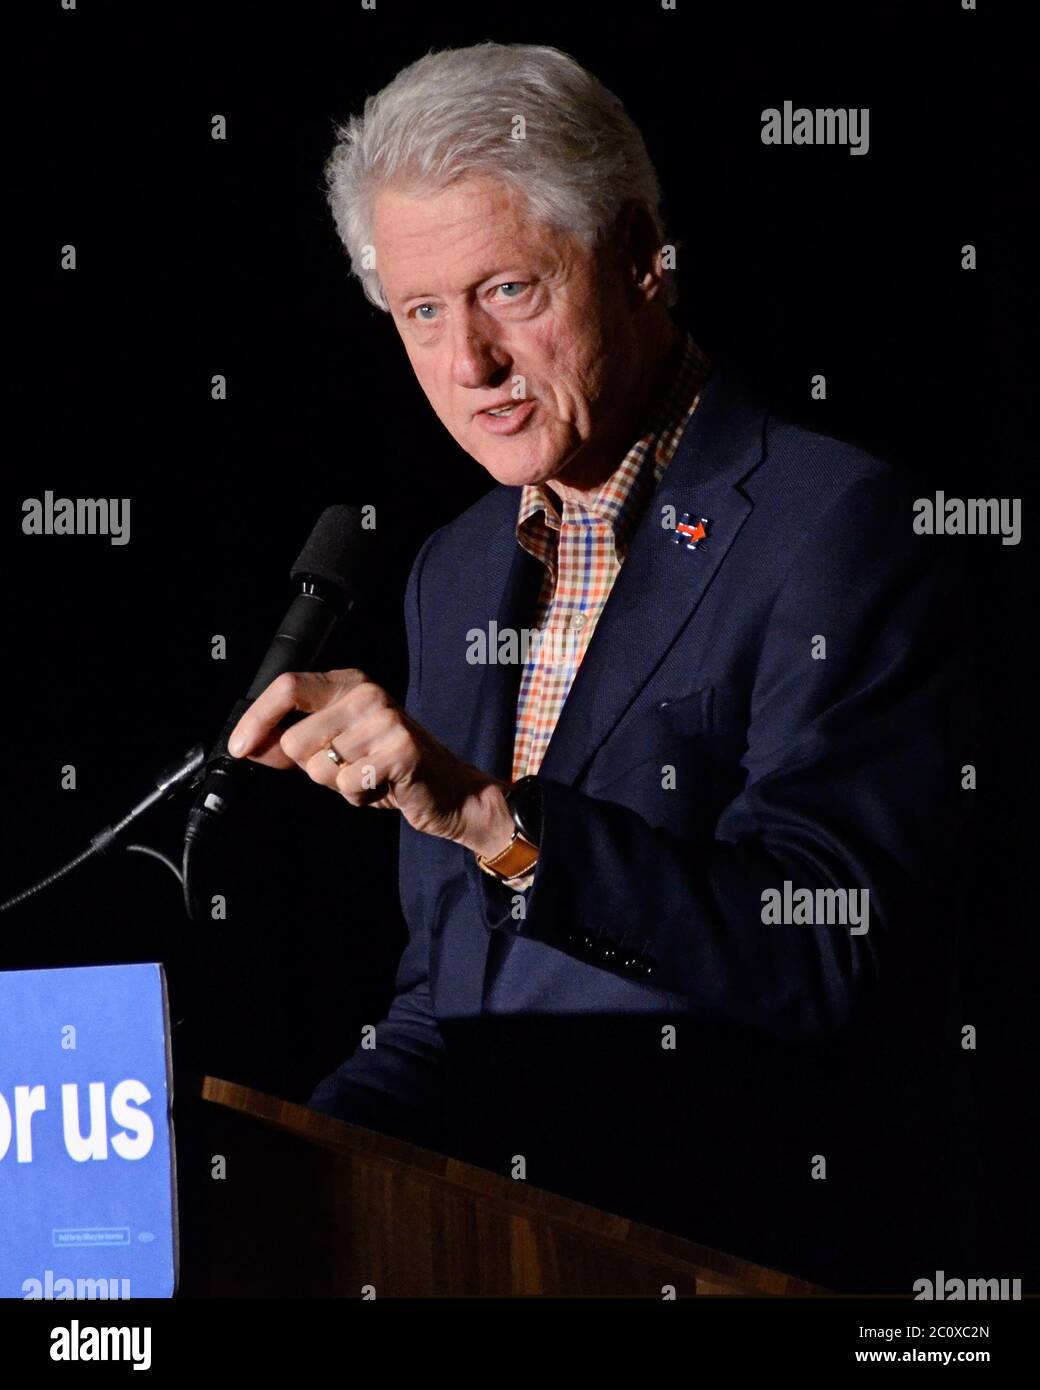 May 4, 2016, Los Angeles, California, USA: Former President Bill Clinton campaigns for Presidential candidate Hillary Clinton ahead of the June 7th California primary by speaking at an event in Honor of Asian American Pacific Islander Heritage Month at the Garden Suite Hotel. (Credit Image: © Billy Bennight/ZUMA Wire) Stock Photo